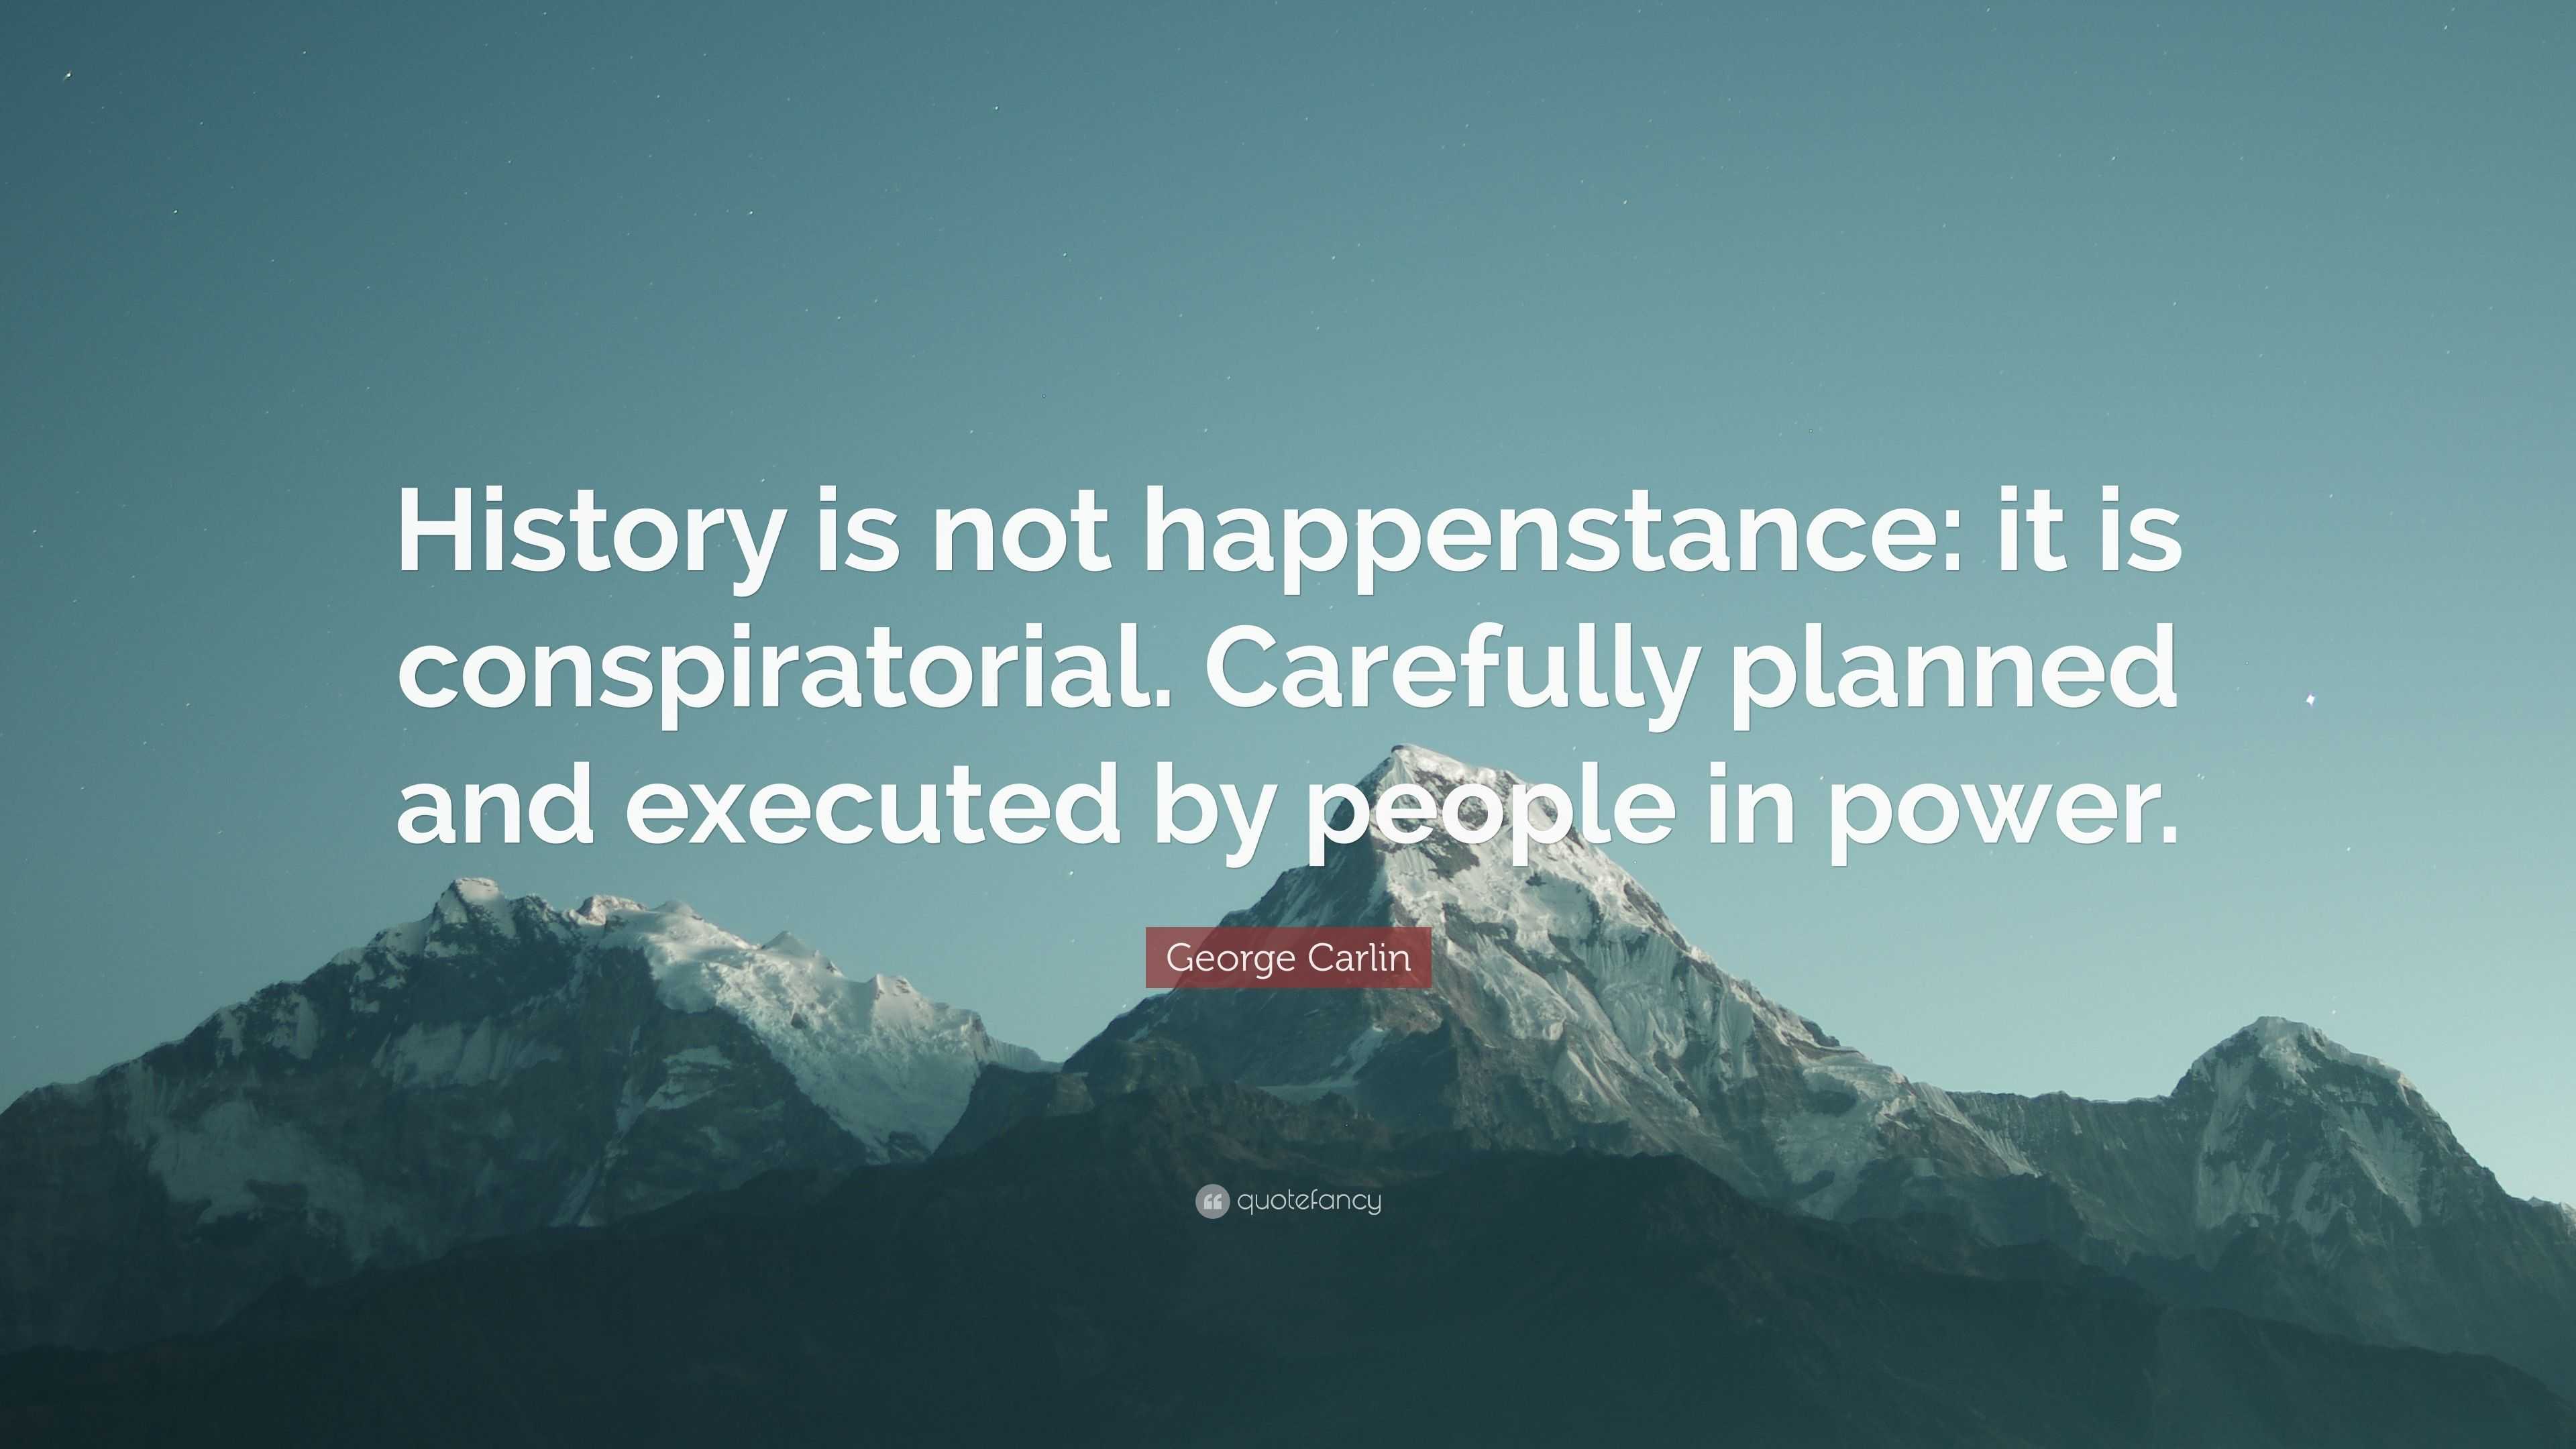 George Carlin Quote: “History is not happenstance: it is conspiratorial